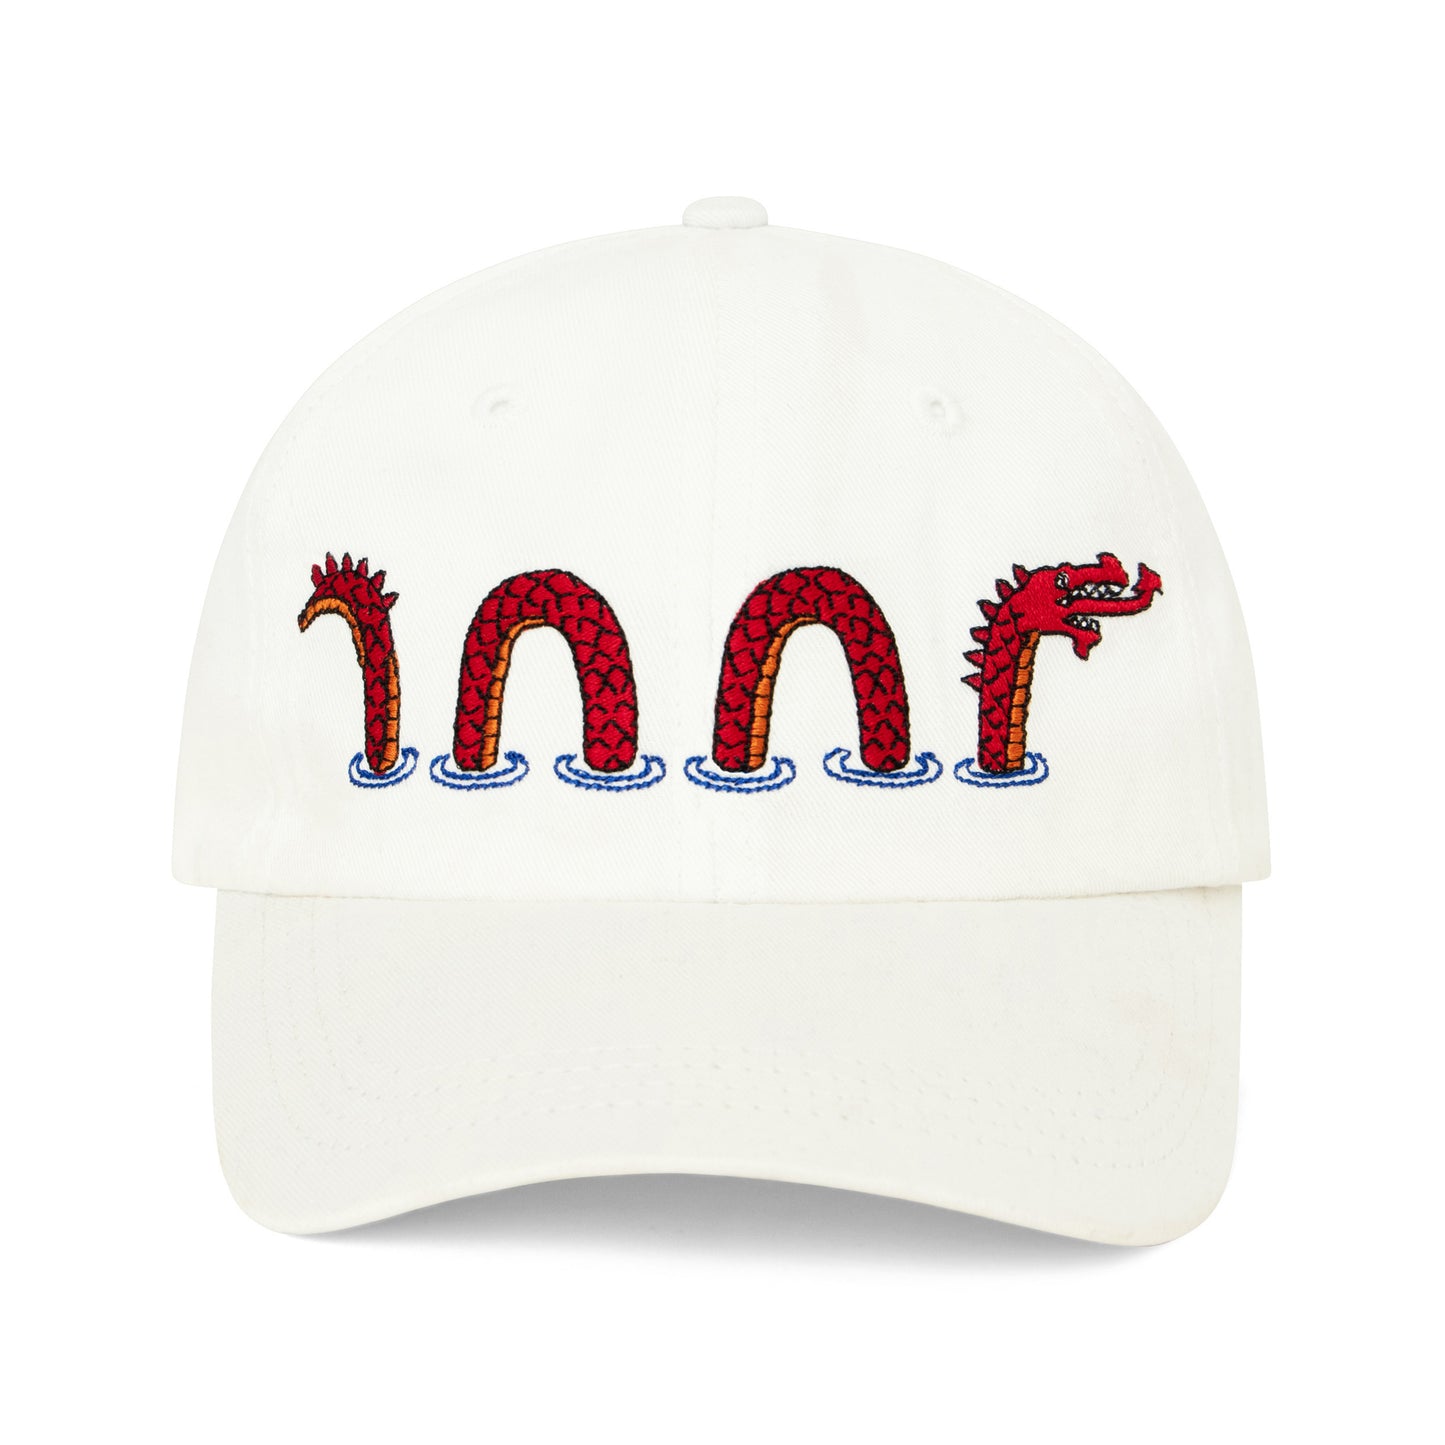  White hat embroidered with red Loch Ness Monster motif. 